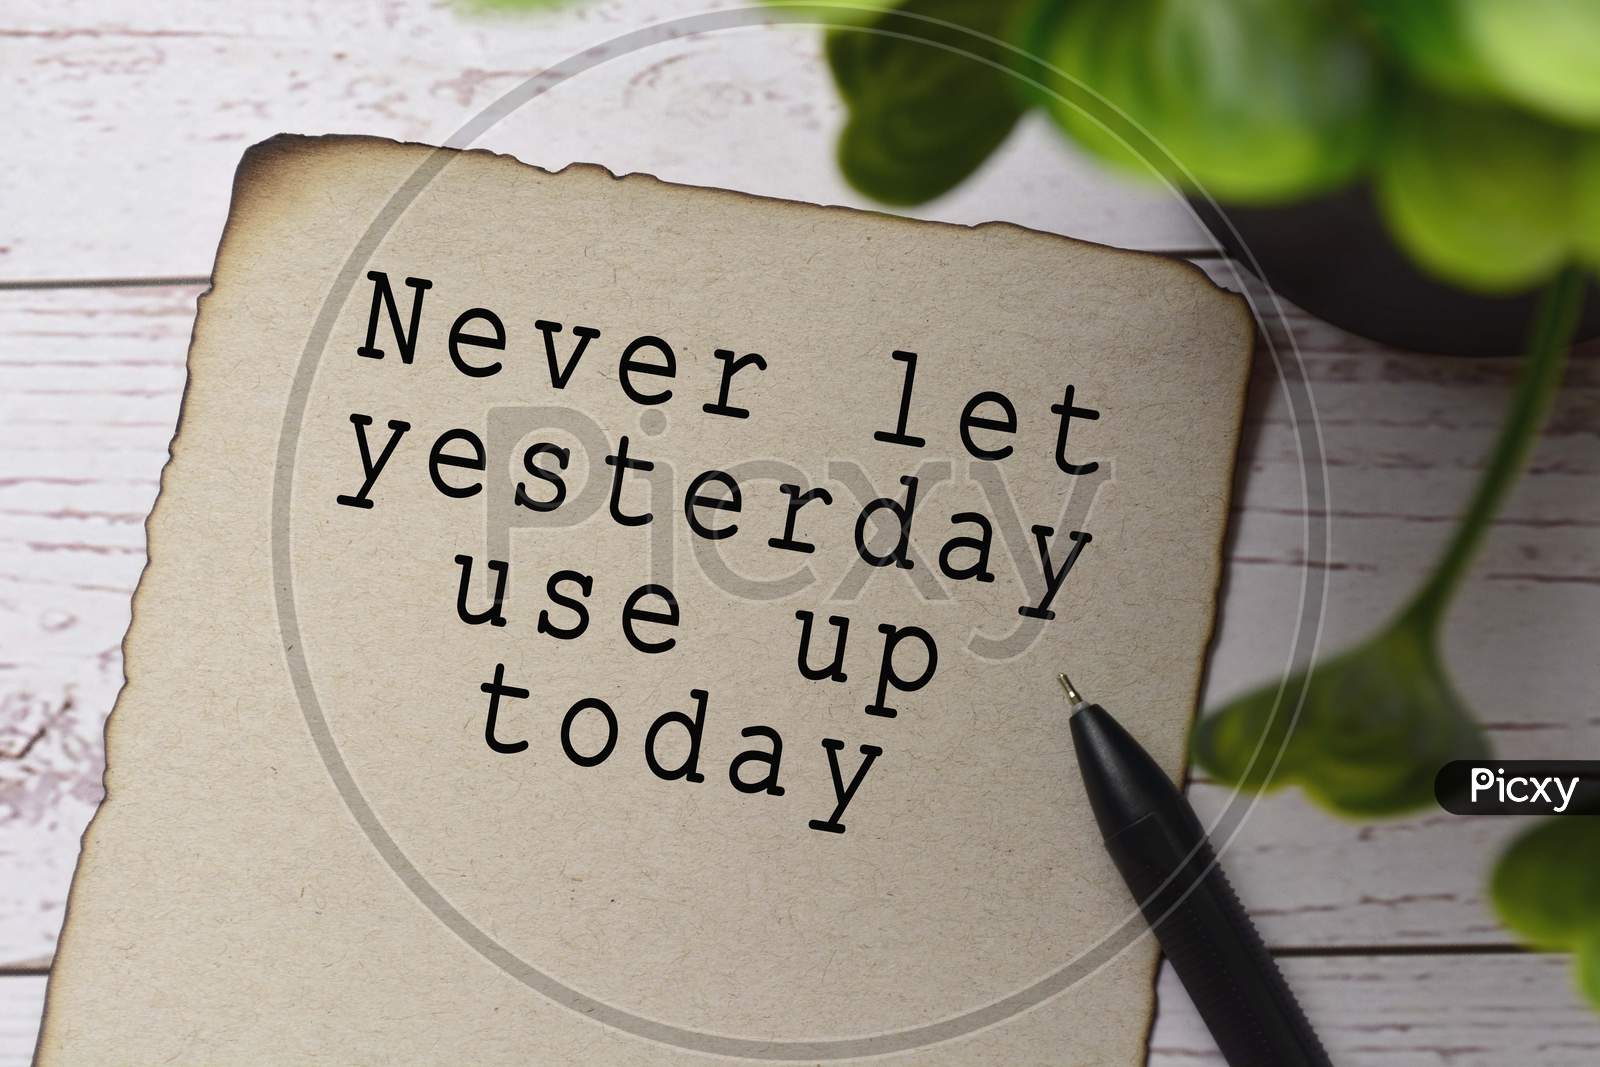 Motivational and inspirational quote on burnt edge brown paper with blurred green plant on wooden desk - Never let yesterday use up today